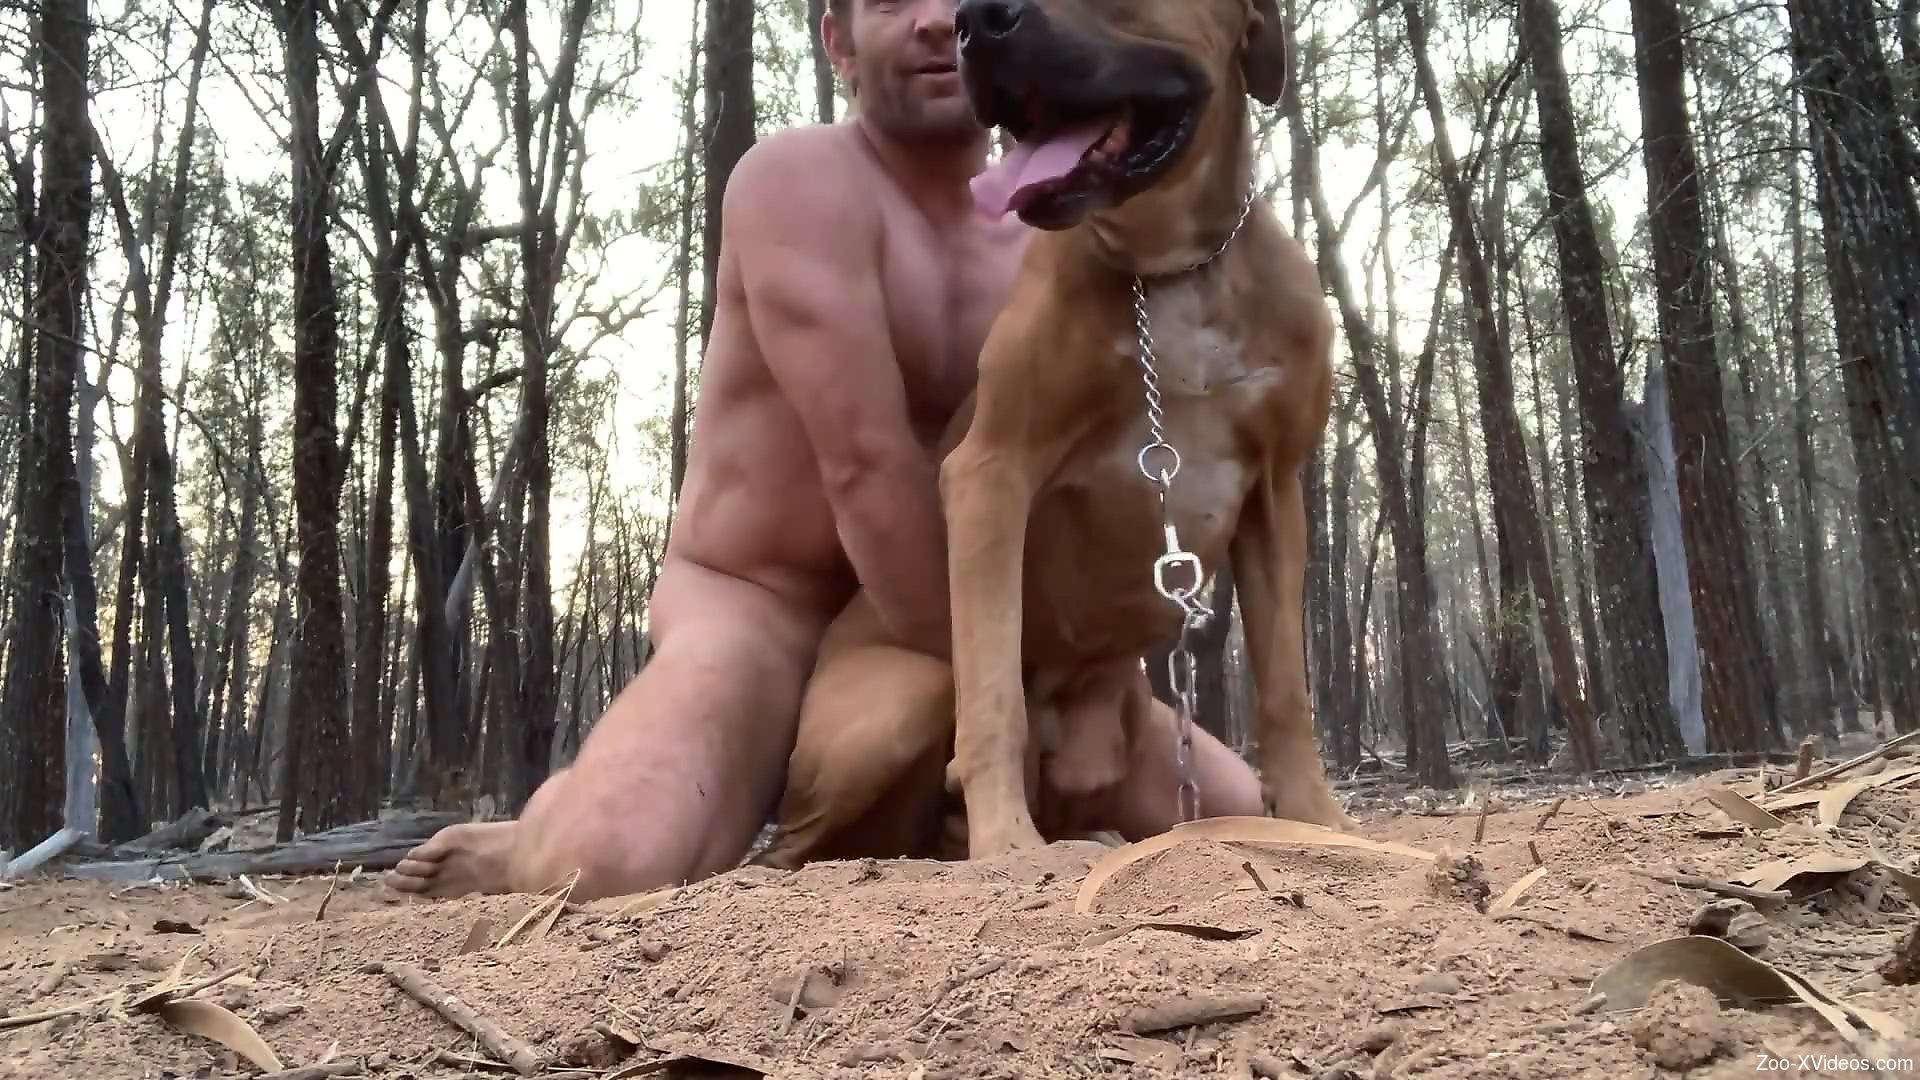 Asian Boy Fucking Dog - Muscular dude fucking his sexy animal from behind